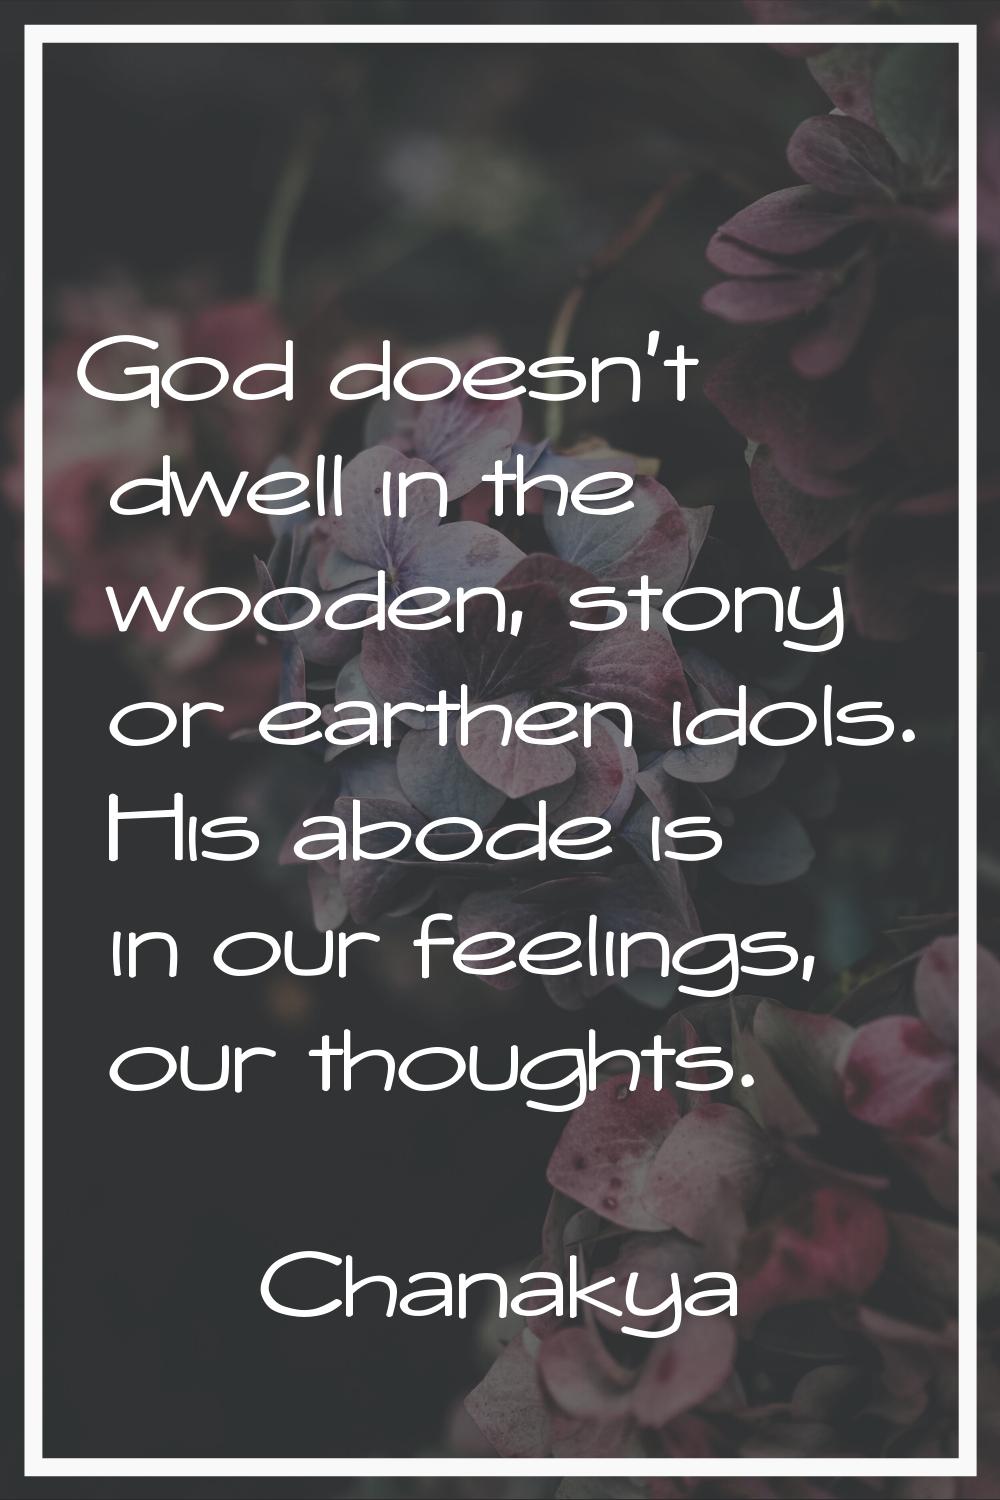 God doesn't dwell in the wooden, stony or earthen idols. His abode is in our feelings, our thoughts